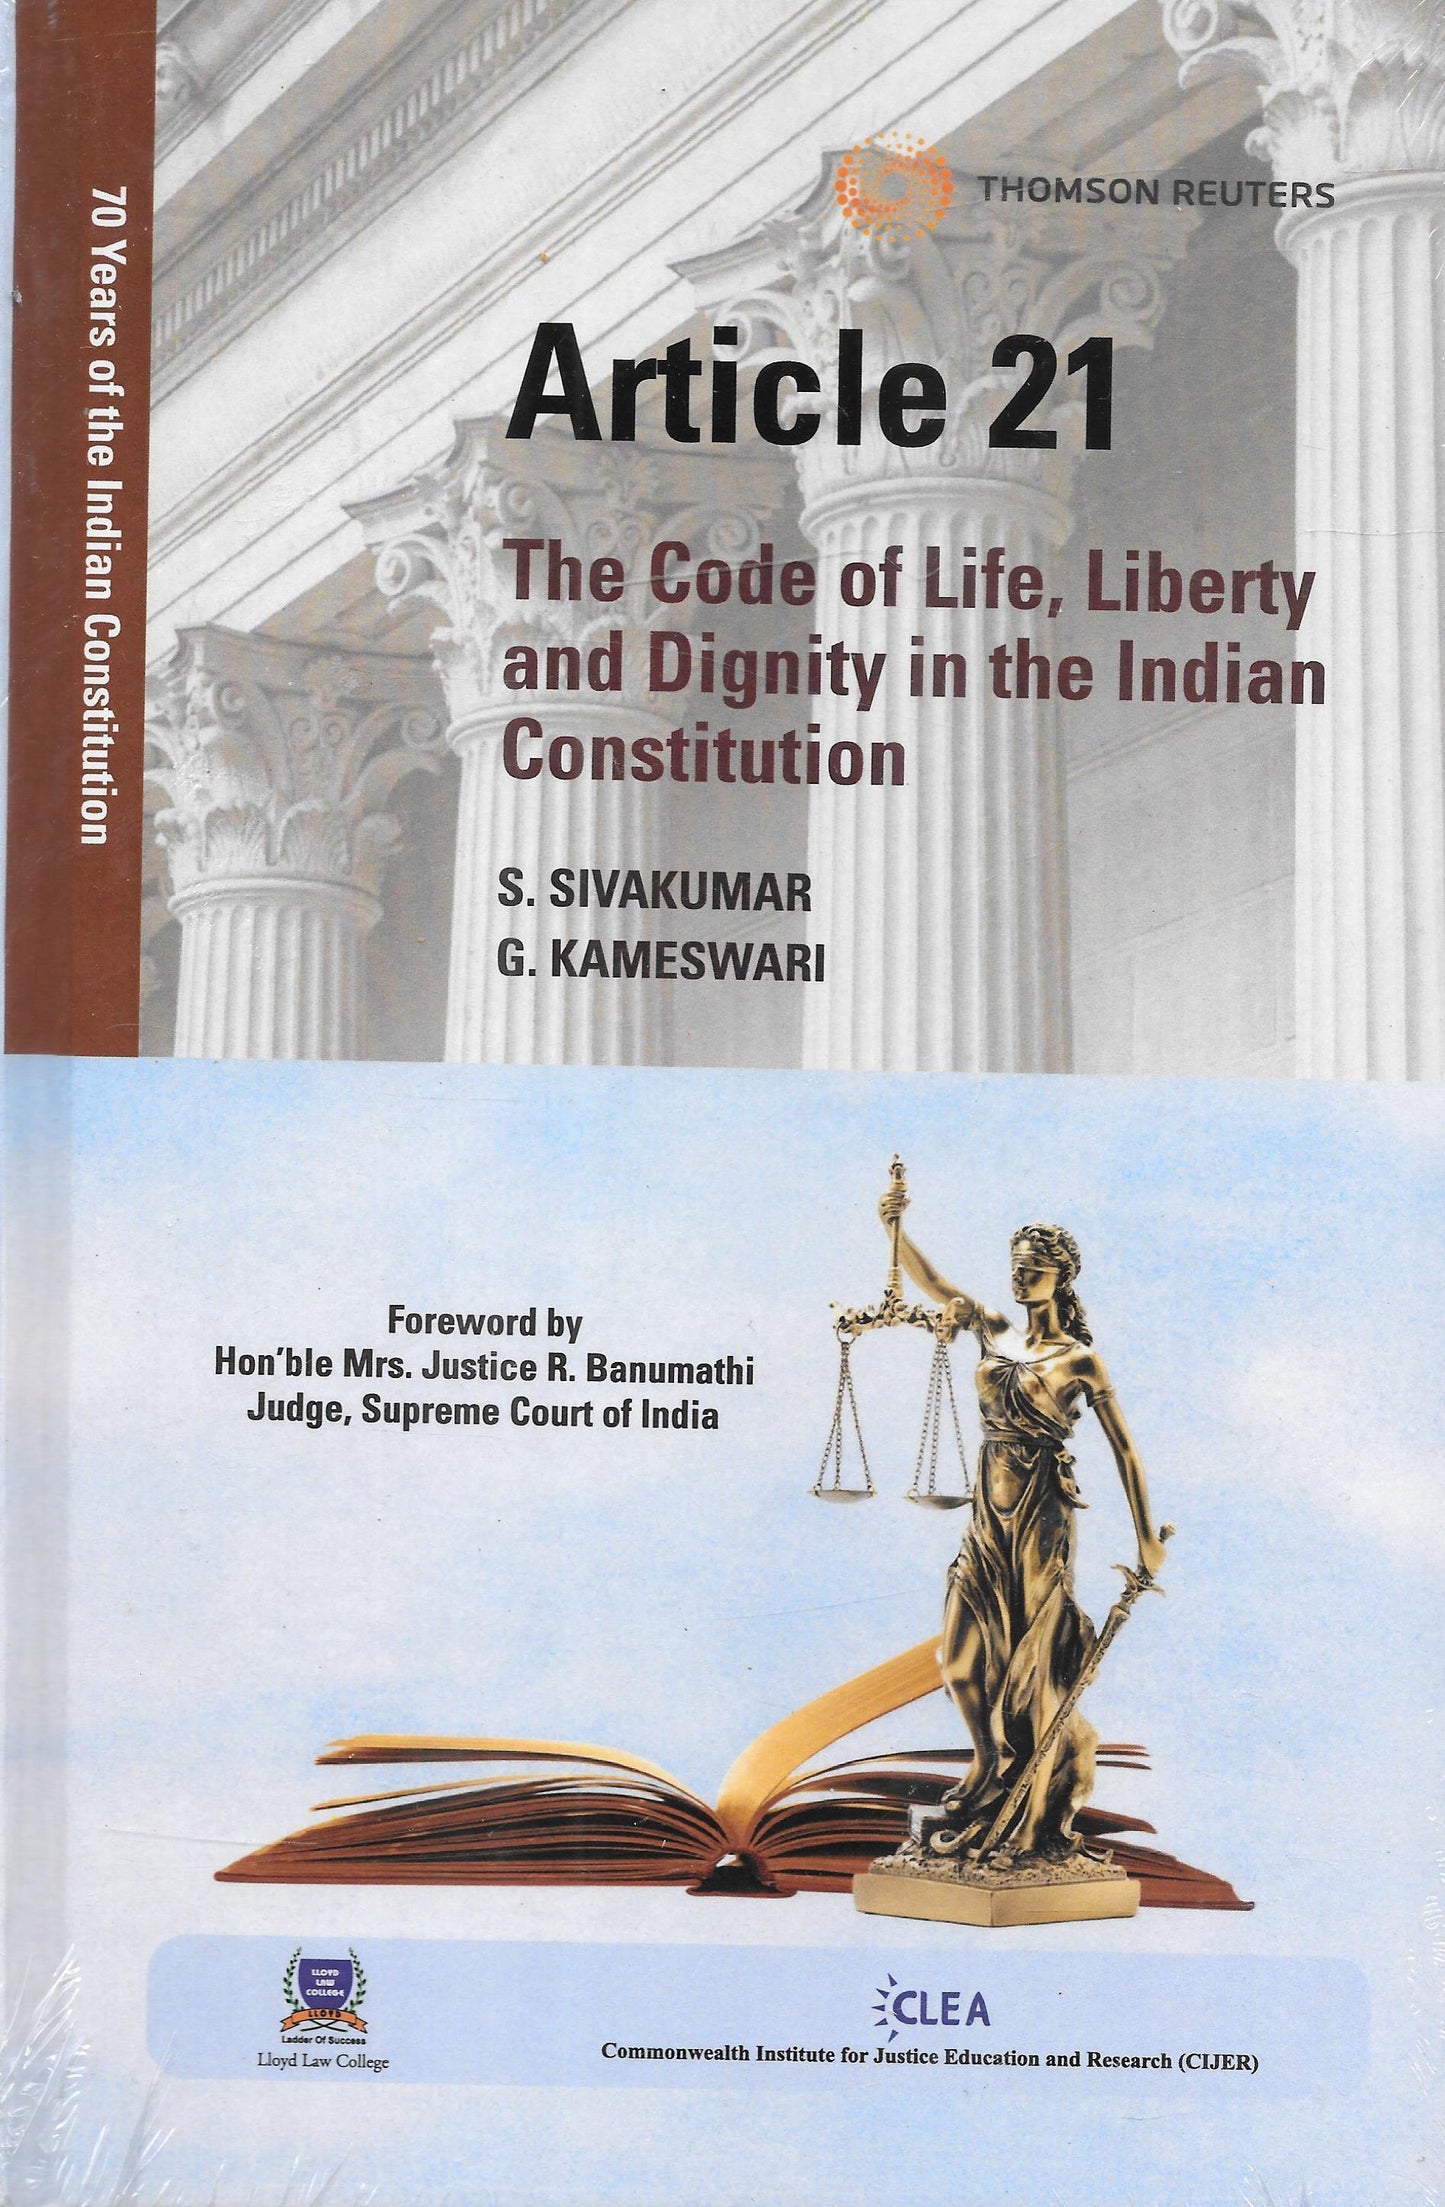 Article 21: The Code of Life, Liberty and Dignity in the Indian Constitution